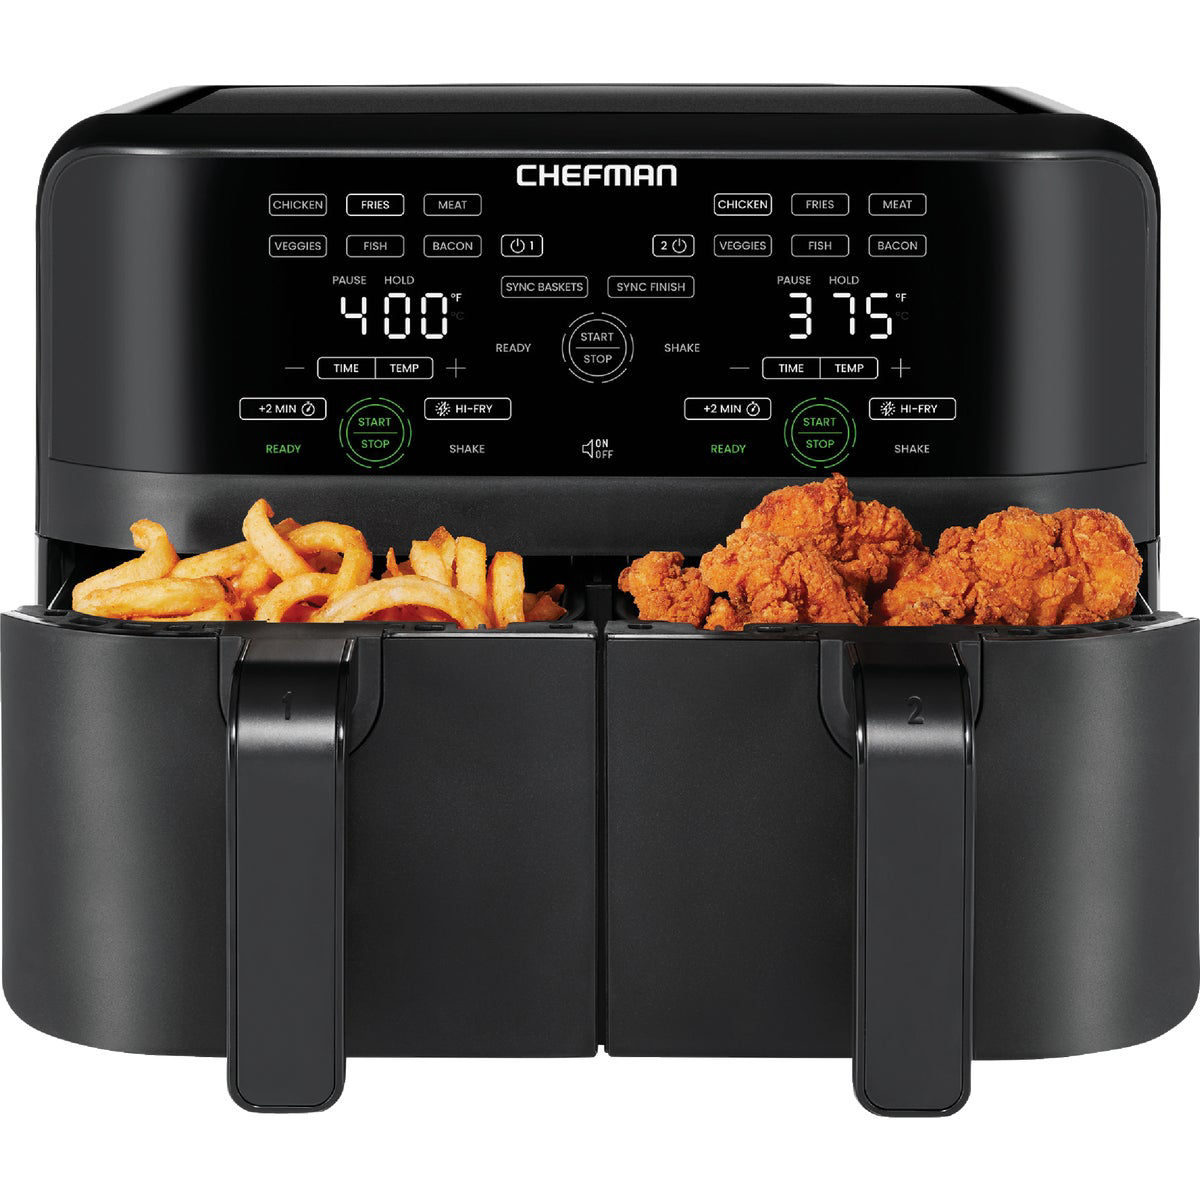 8 Qt. TurboFry Touch Window Air Fryer